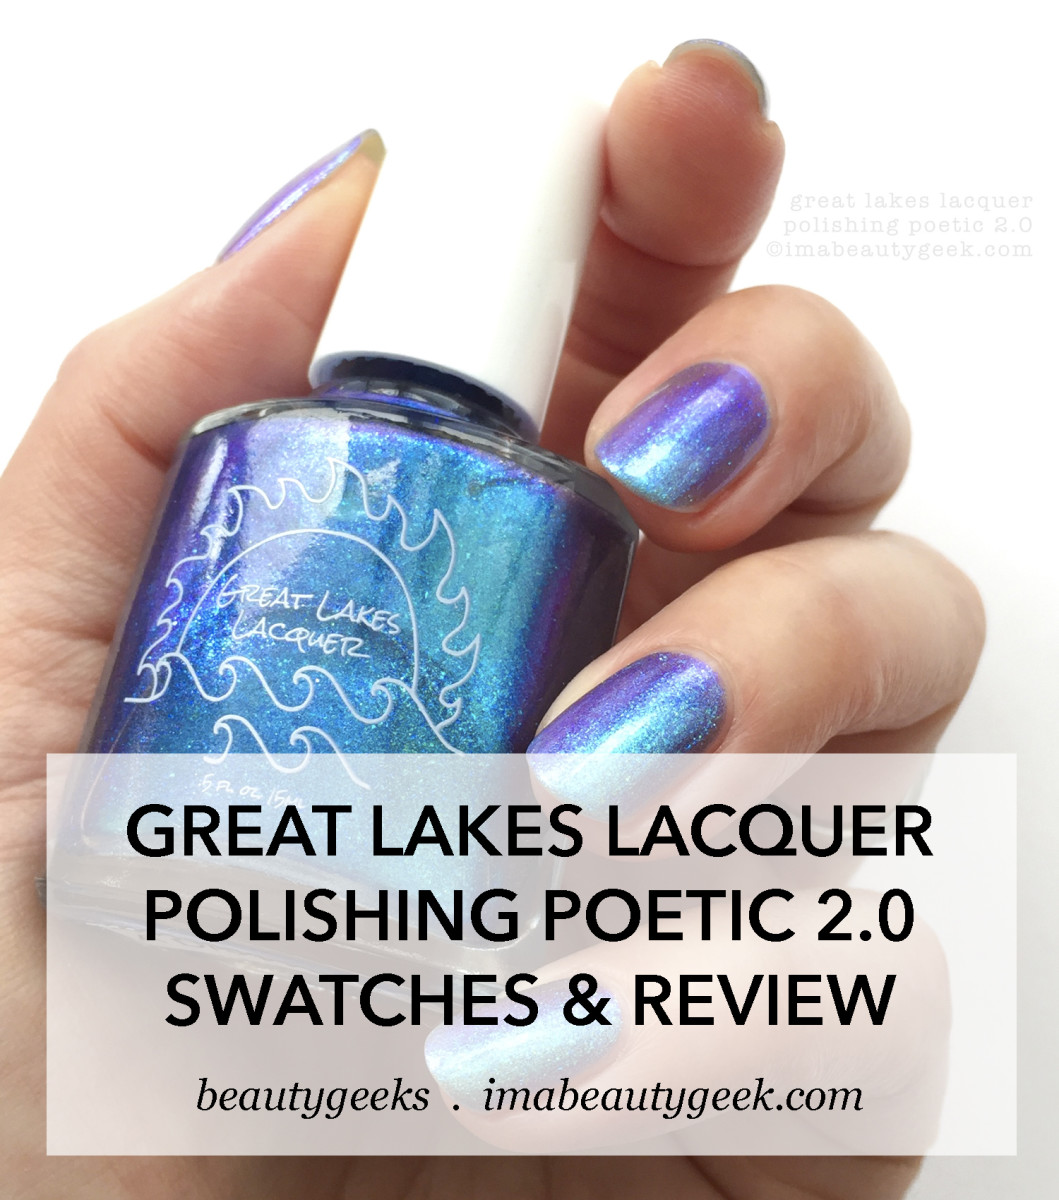 Great Lakes Lacquer Polishing Poetic 2 Swatches Review 2018 (1)